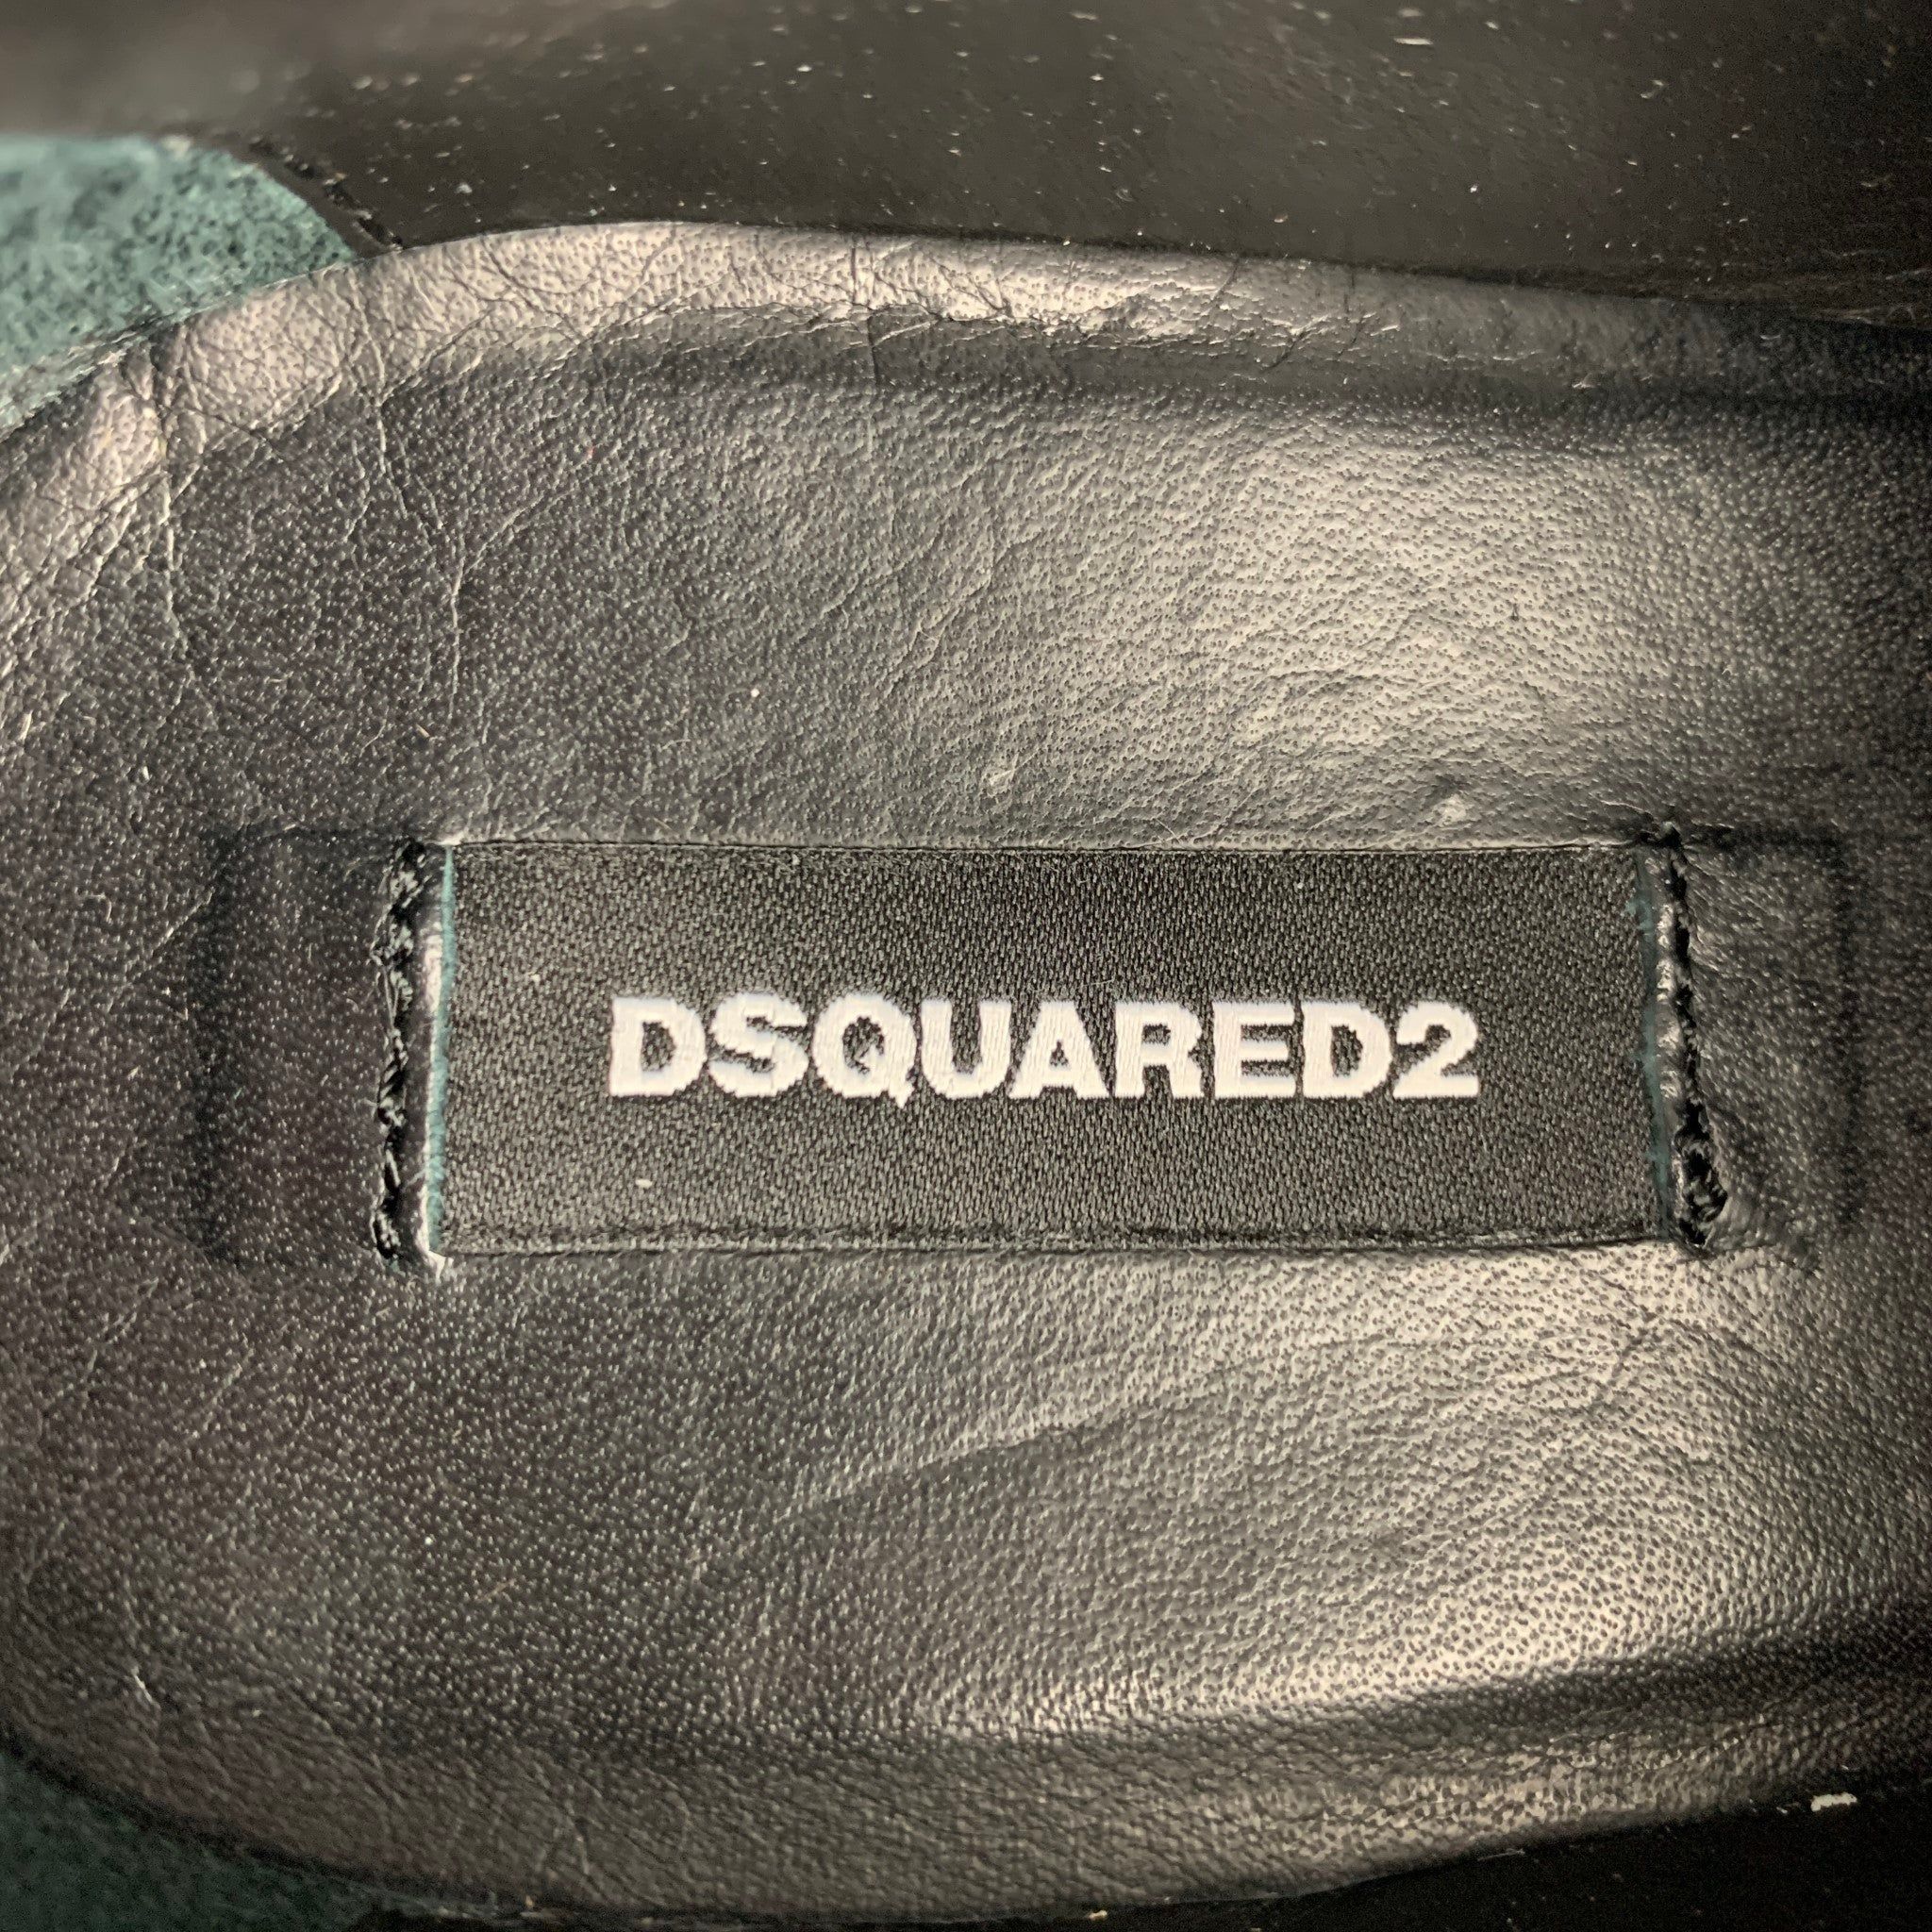 Dsquared2 Worlds End Black Leather Studded Lace Up Shoes Size US 9 / EU 42 - 7 Thumbnail